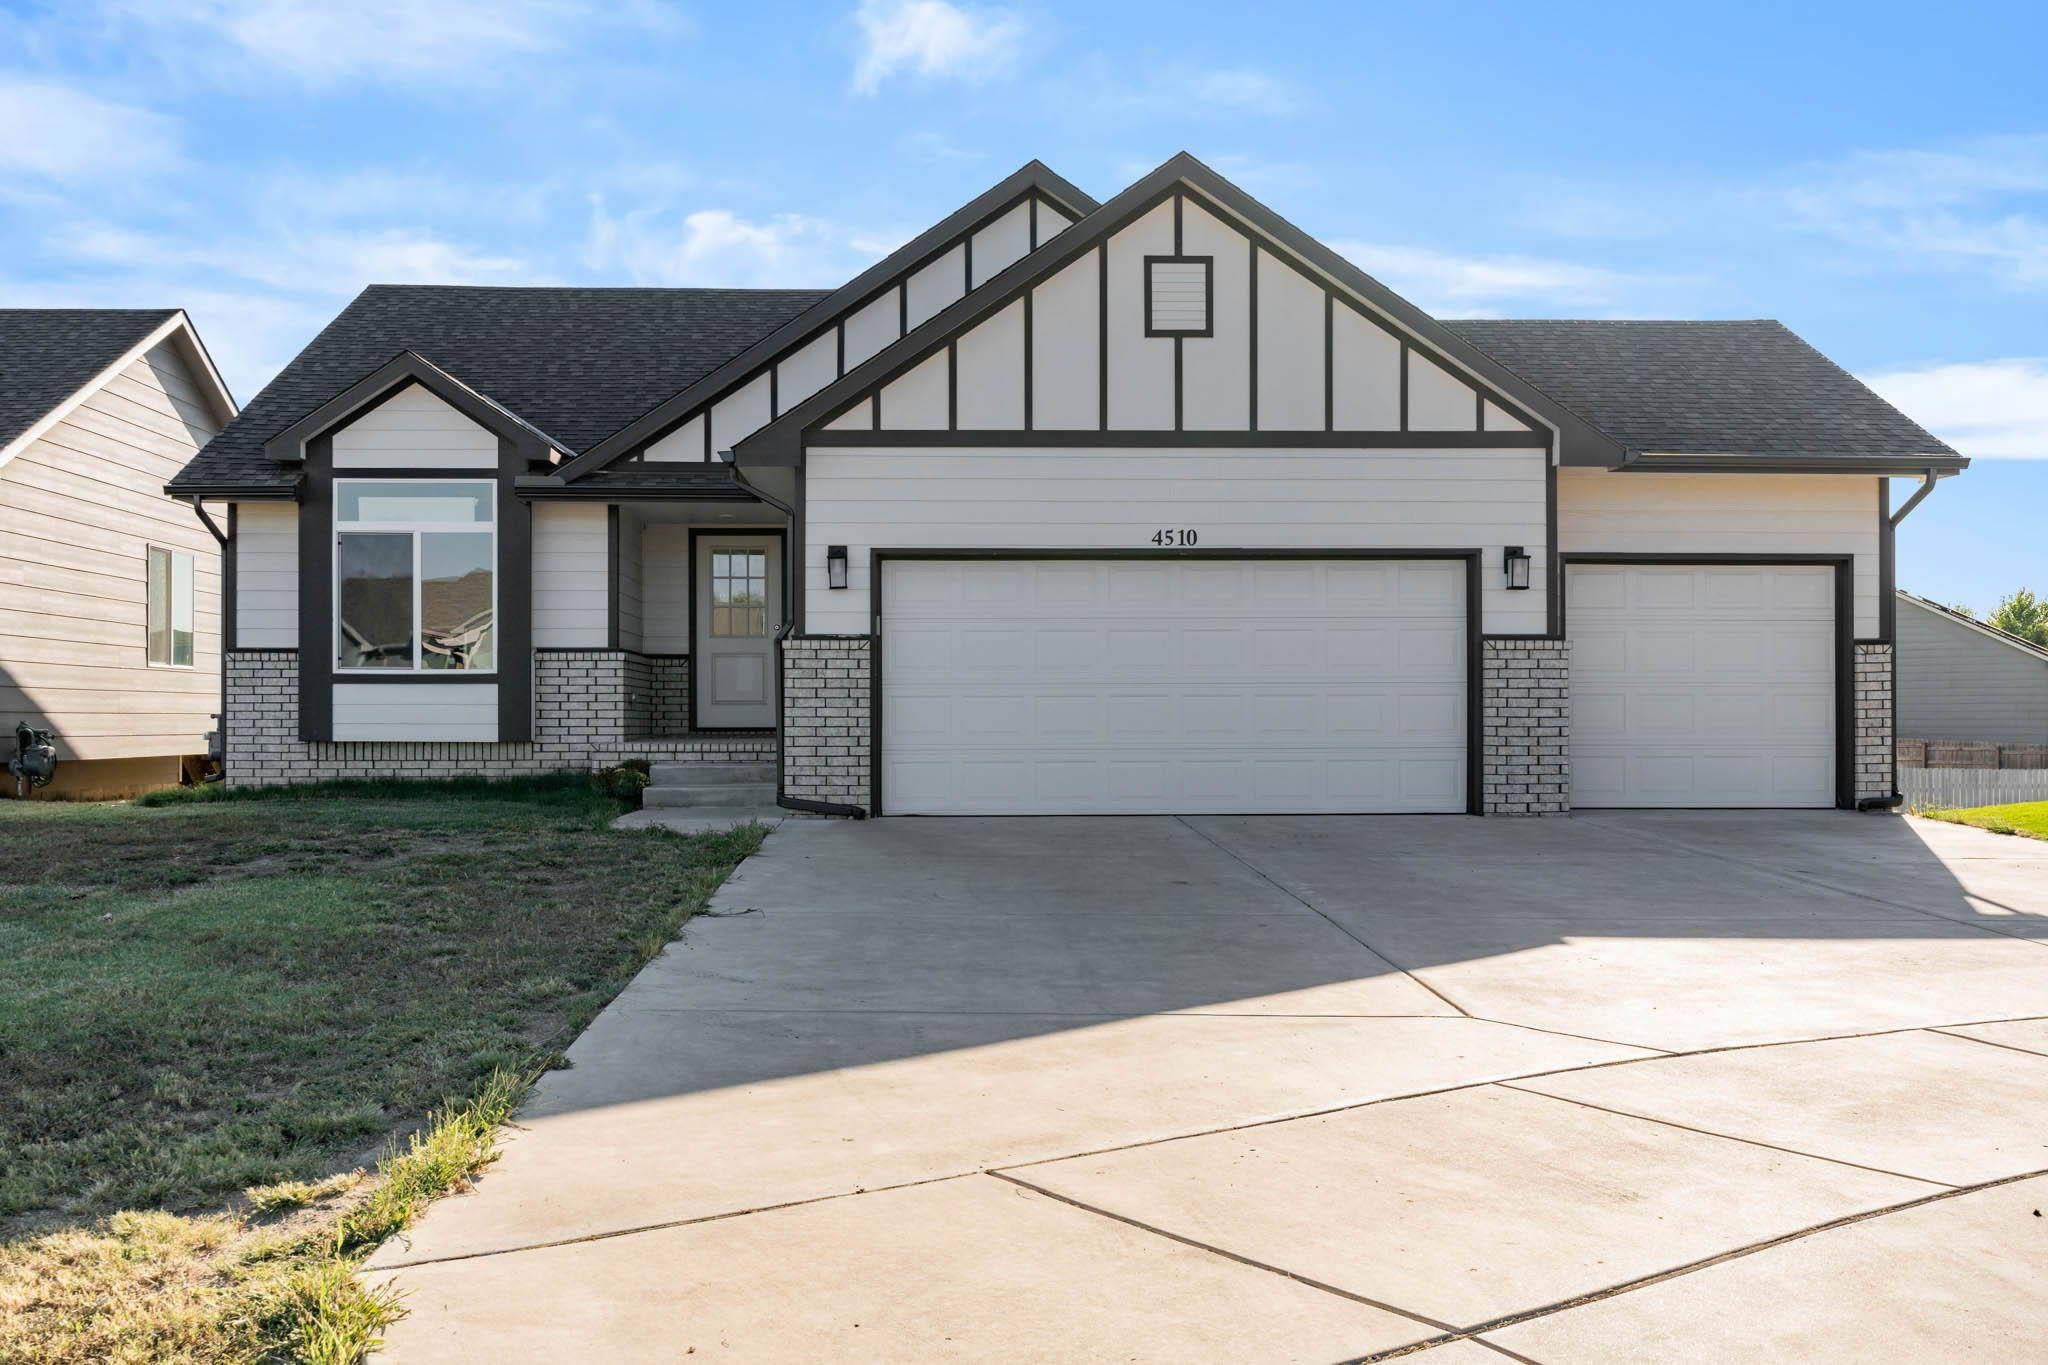 Come check out this 4 bedroom, 3 bathroom home. This home located in Wichita, but in award winning H